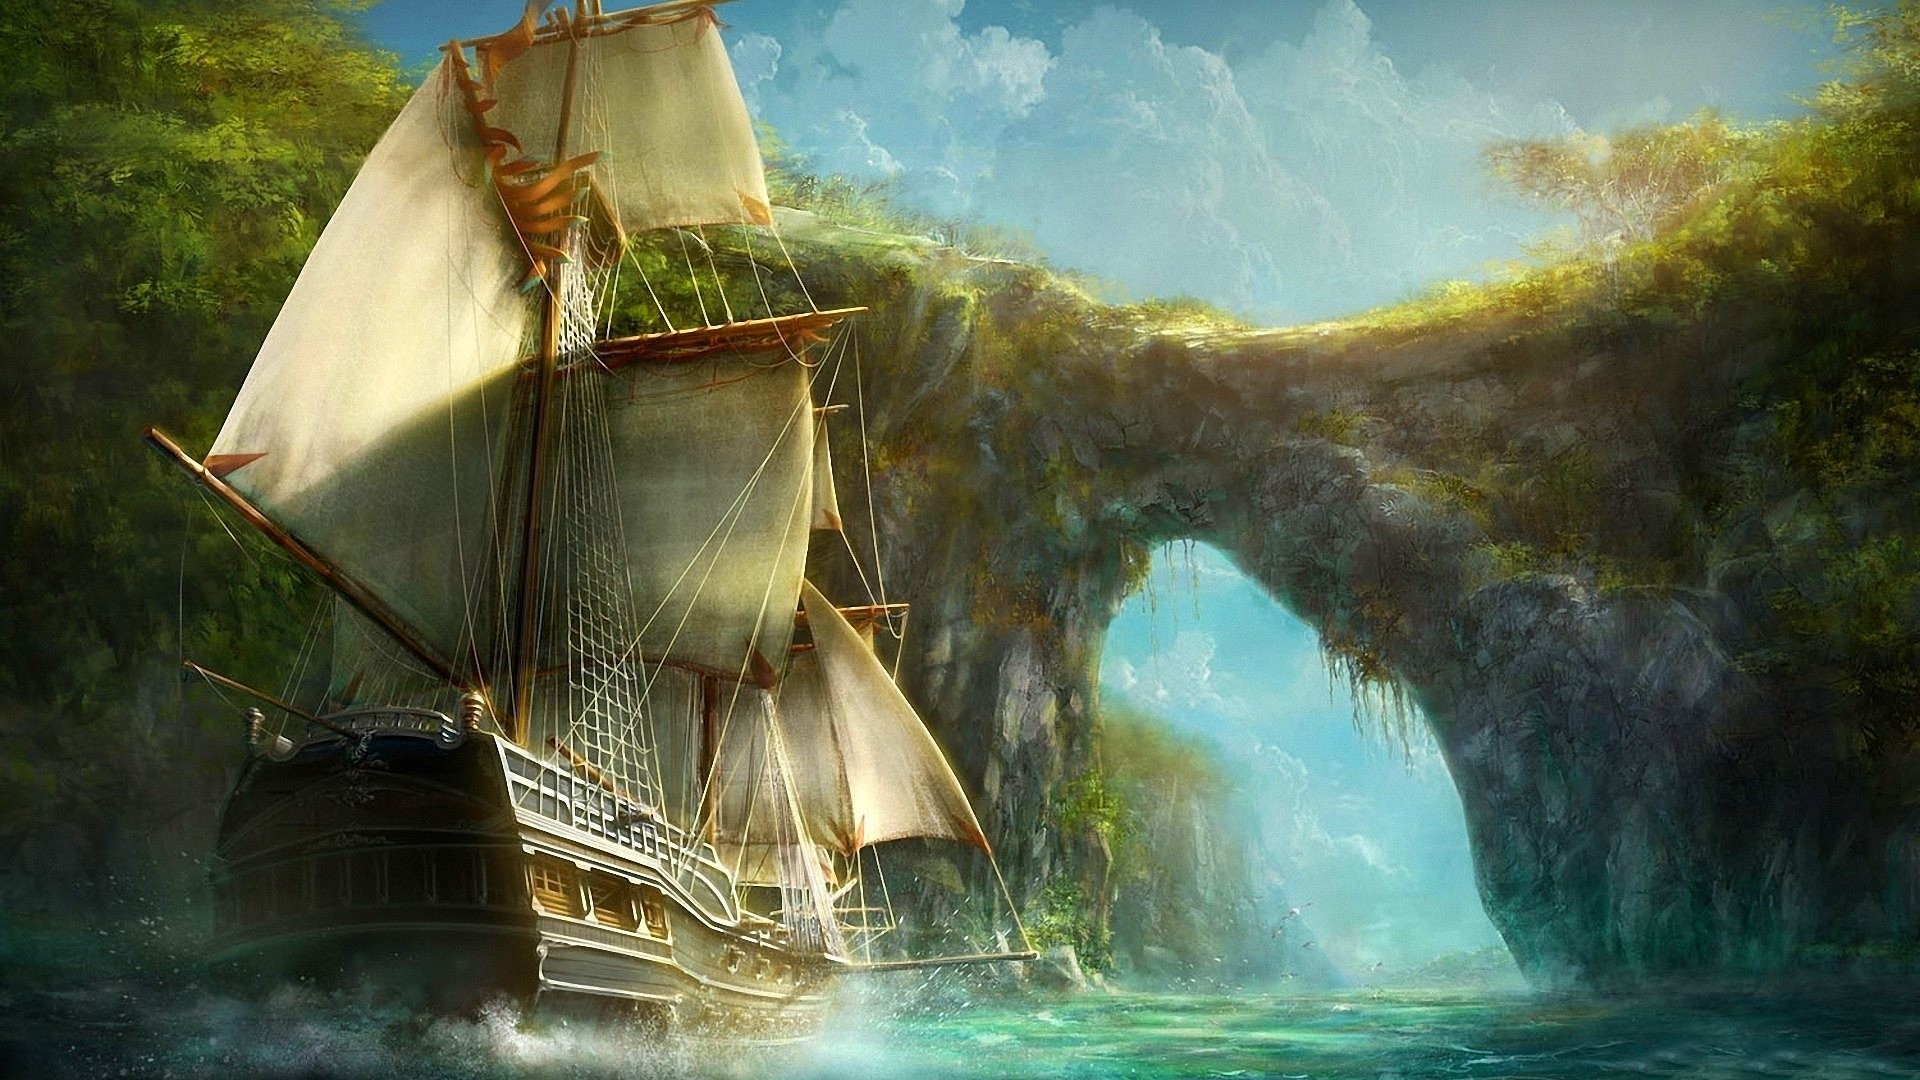 Wallpaper Fantasy Art Desktop With high-resolution 1920X1080 pixel. You can use this wallpaper for your Windows and Mac OS computers as well as your Android and iPhone smartphones